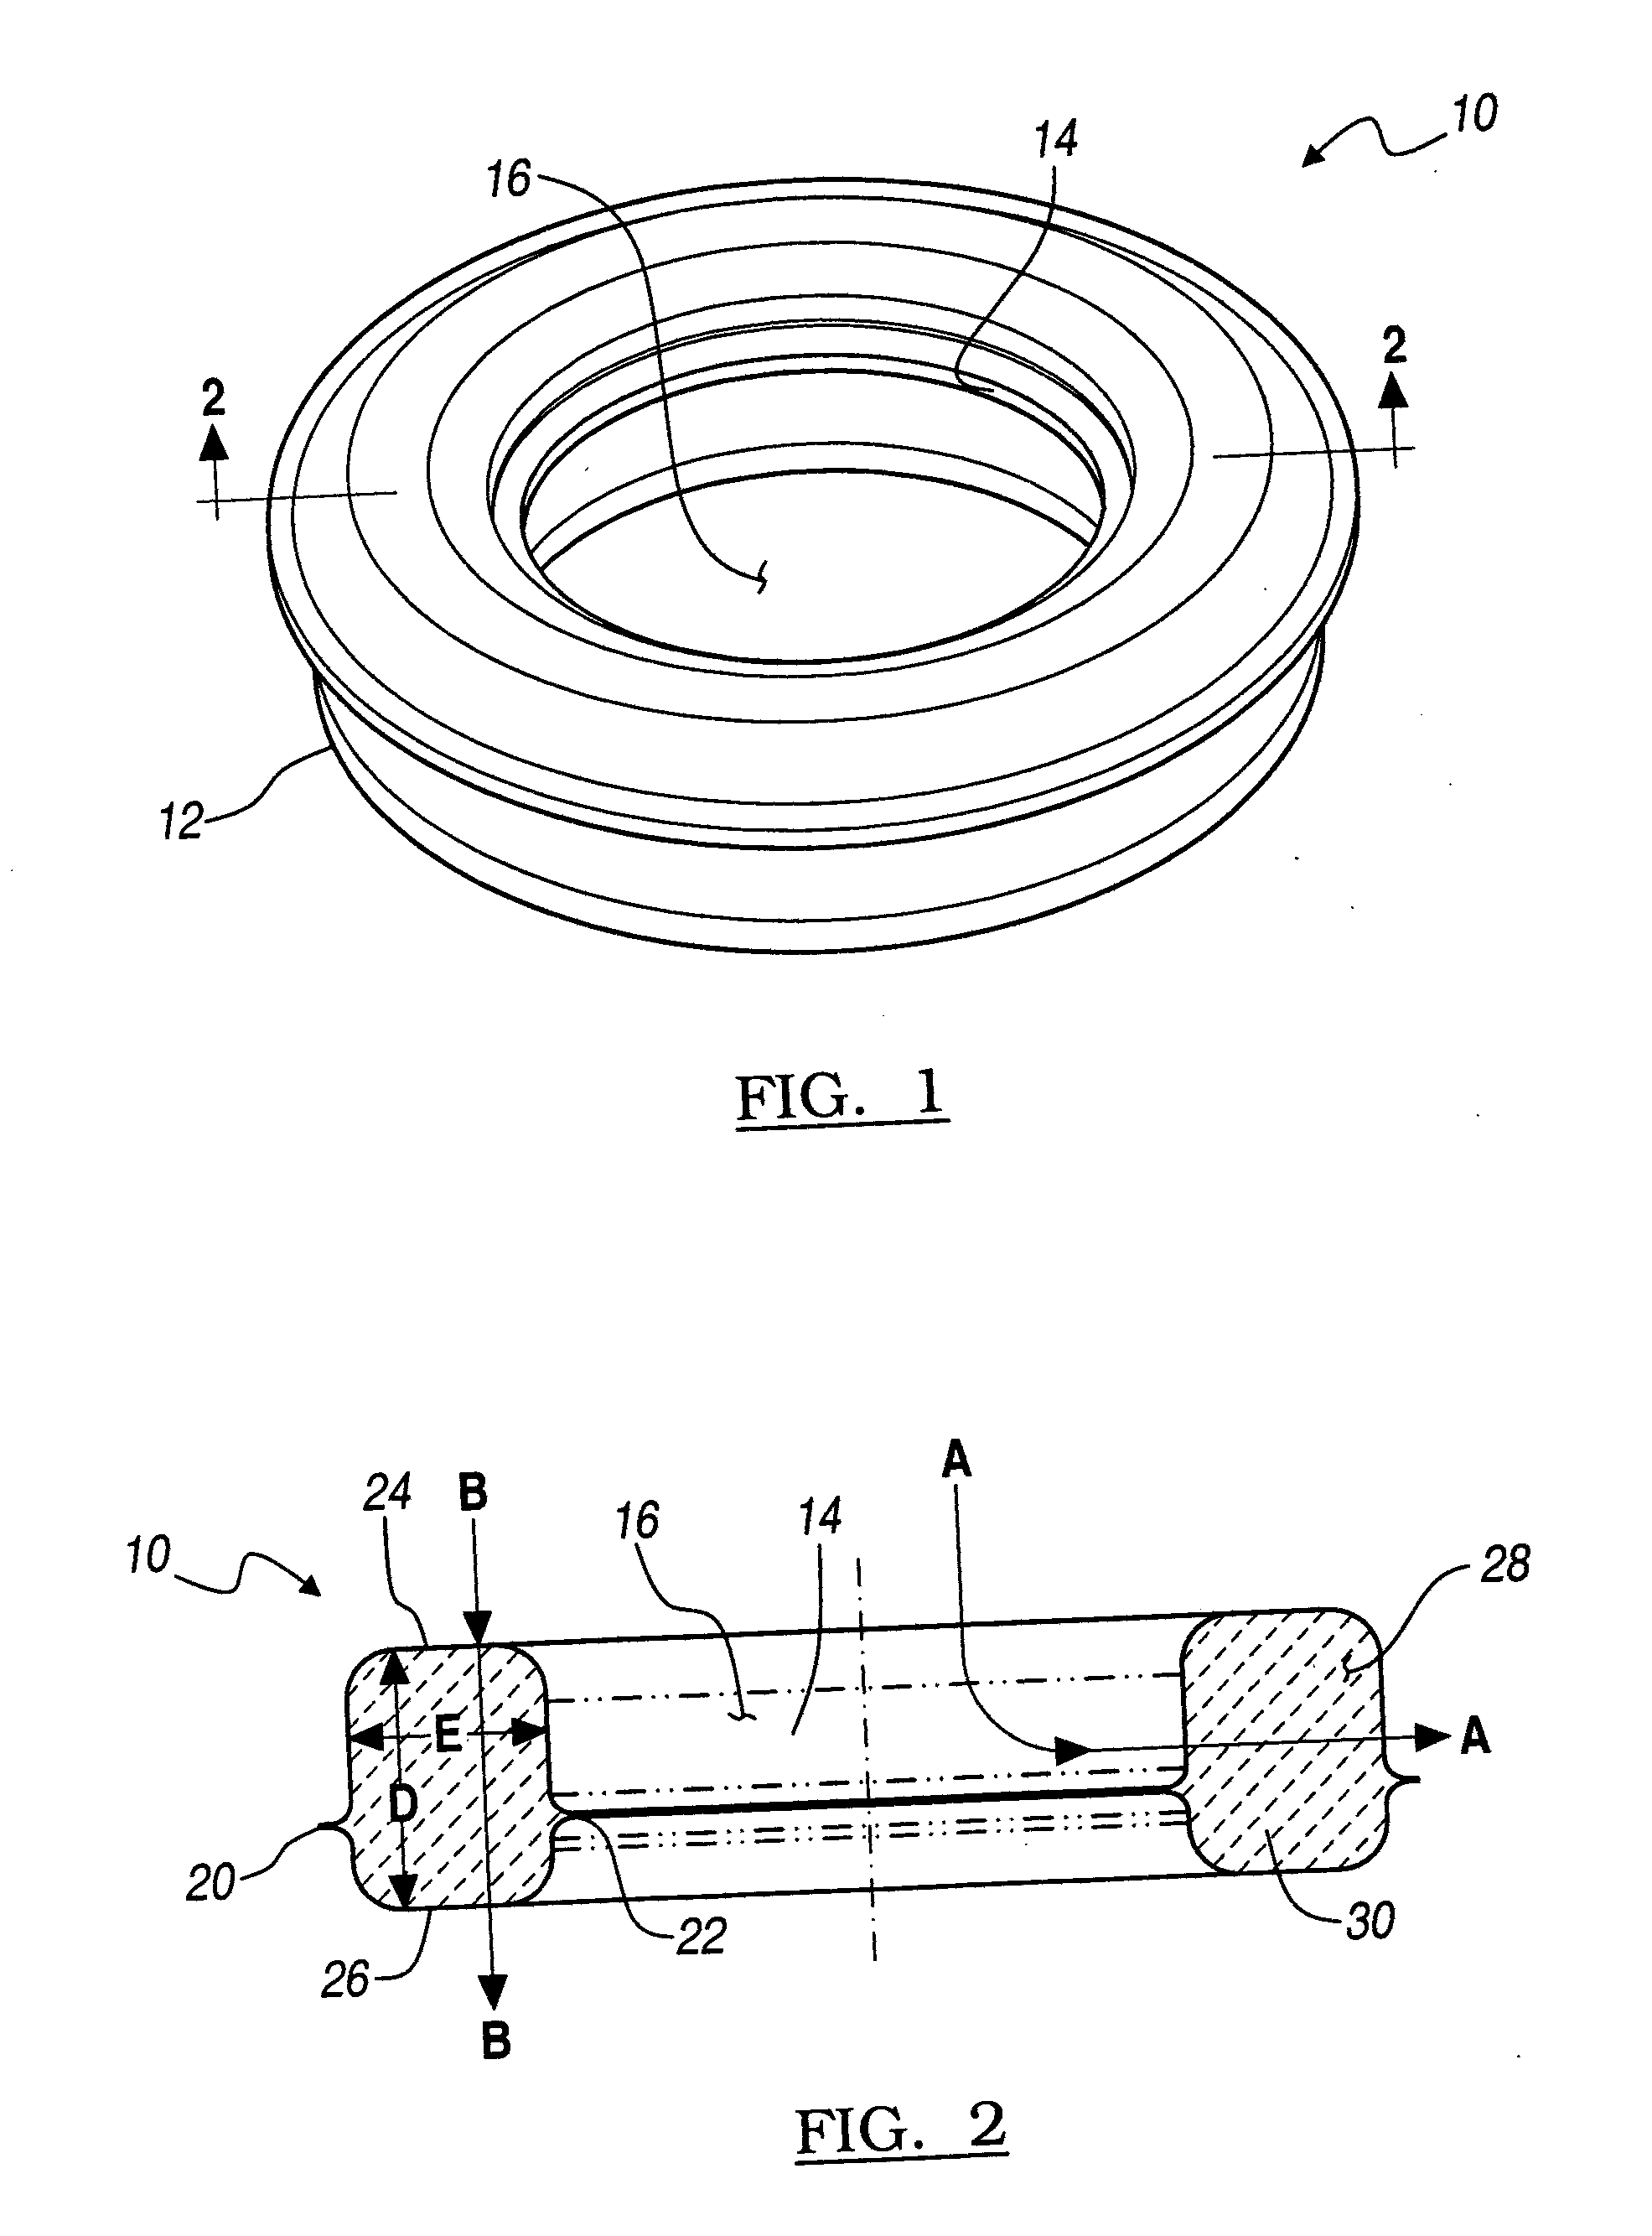 Method and apparatus for preparing a beverage